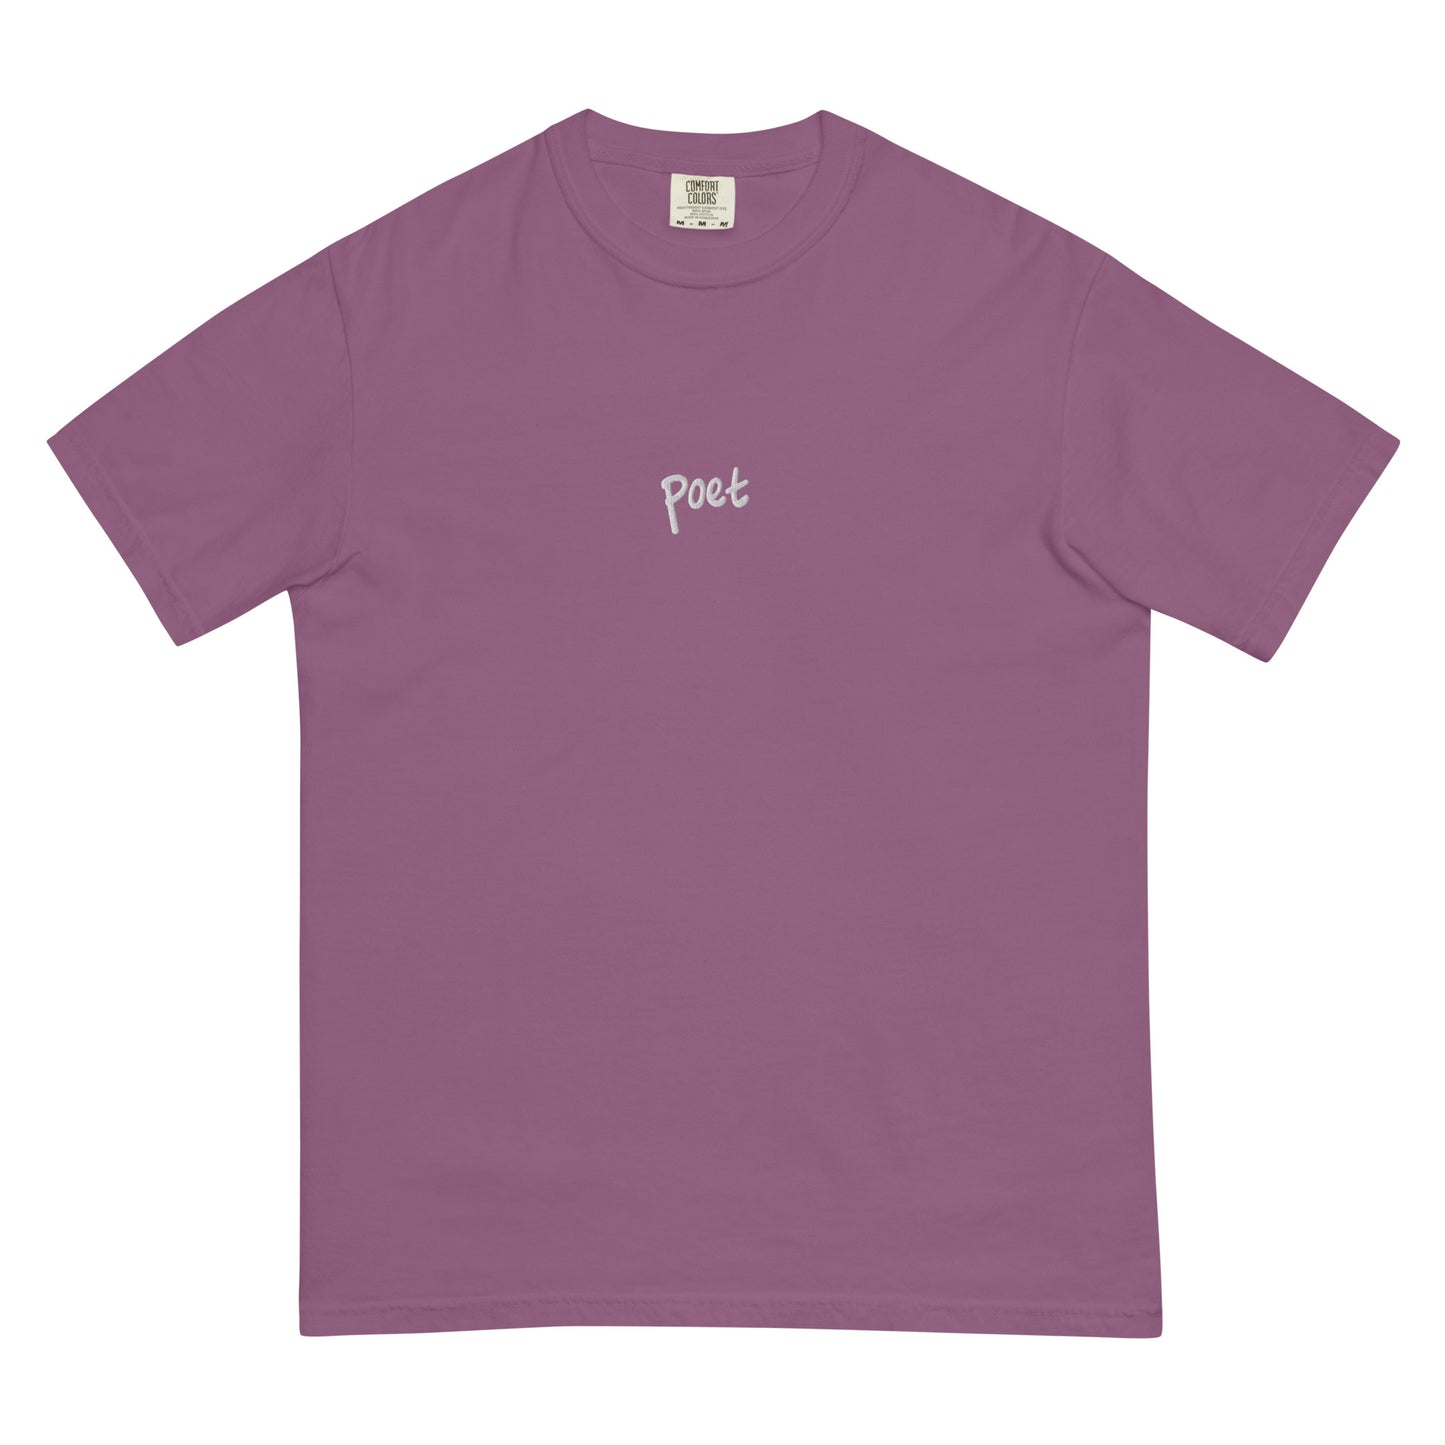 poet embroidered garment-dyed heavyweight t-shirt